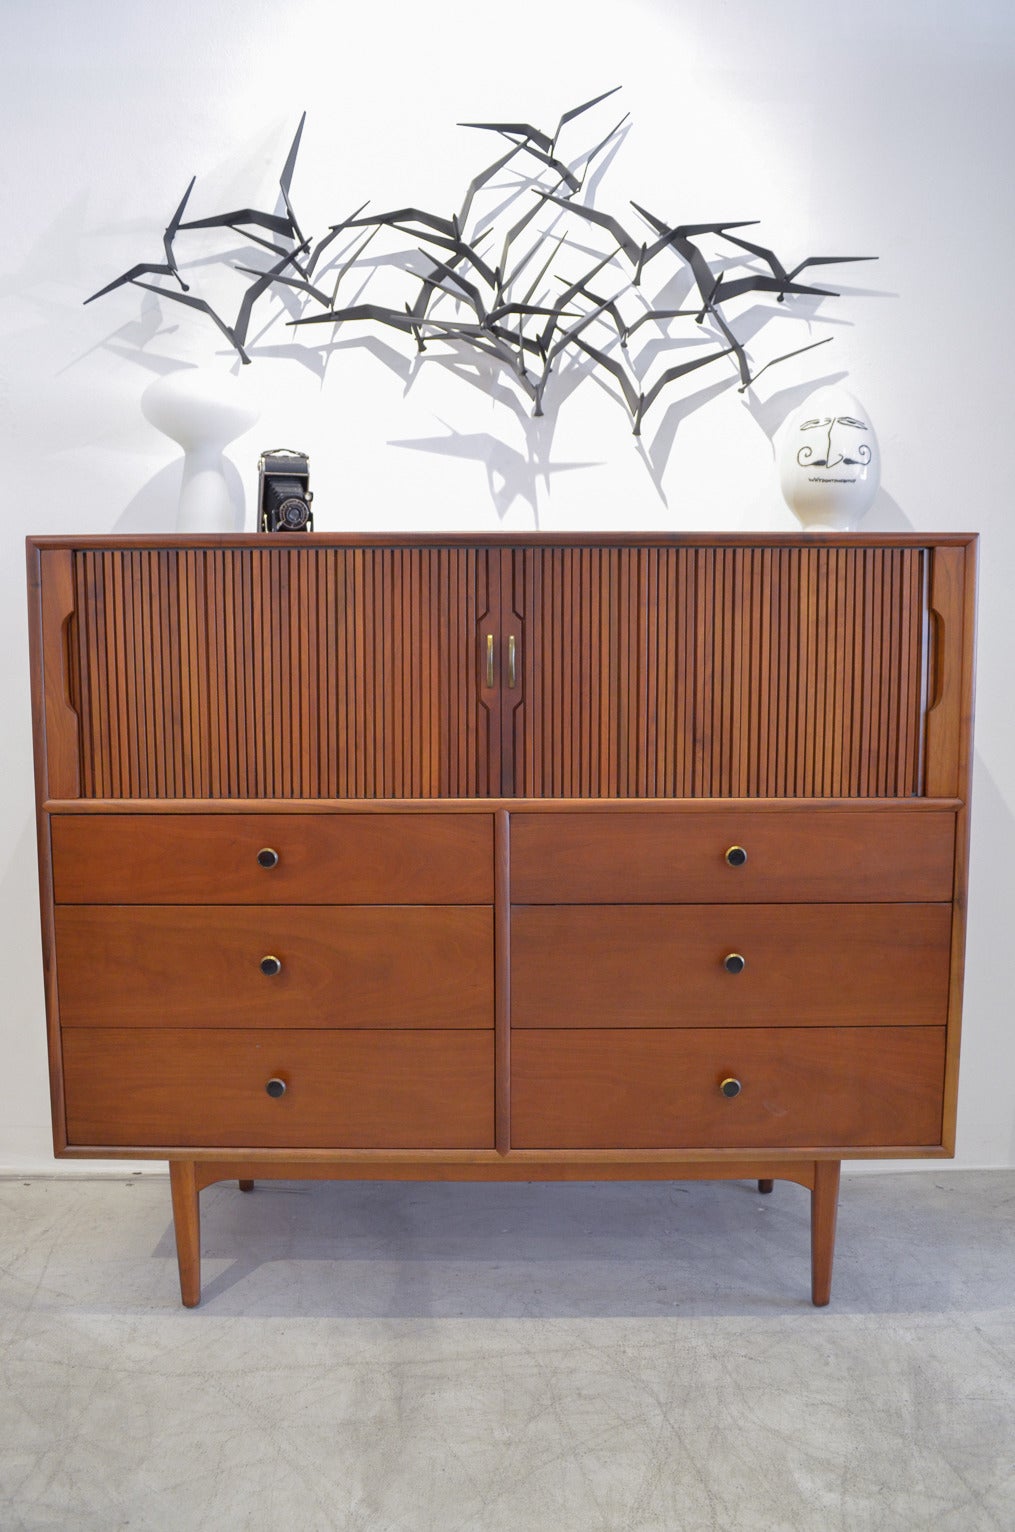 Beautiful walnut tambour door highboy or dresser by Kipp Stewart and Stuart McDougall for Drexel Declaration. Rare piece, not highly produced and scarcely available.

Beautiful walnut with upper tambour doors with drawers that are completely